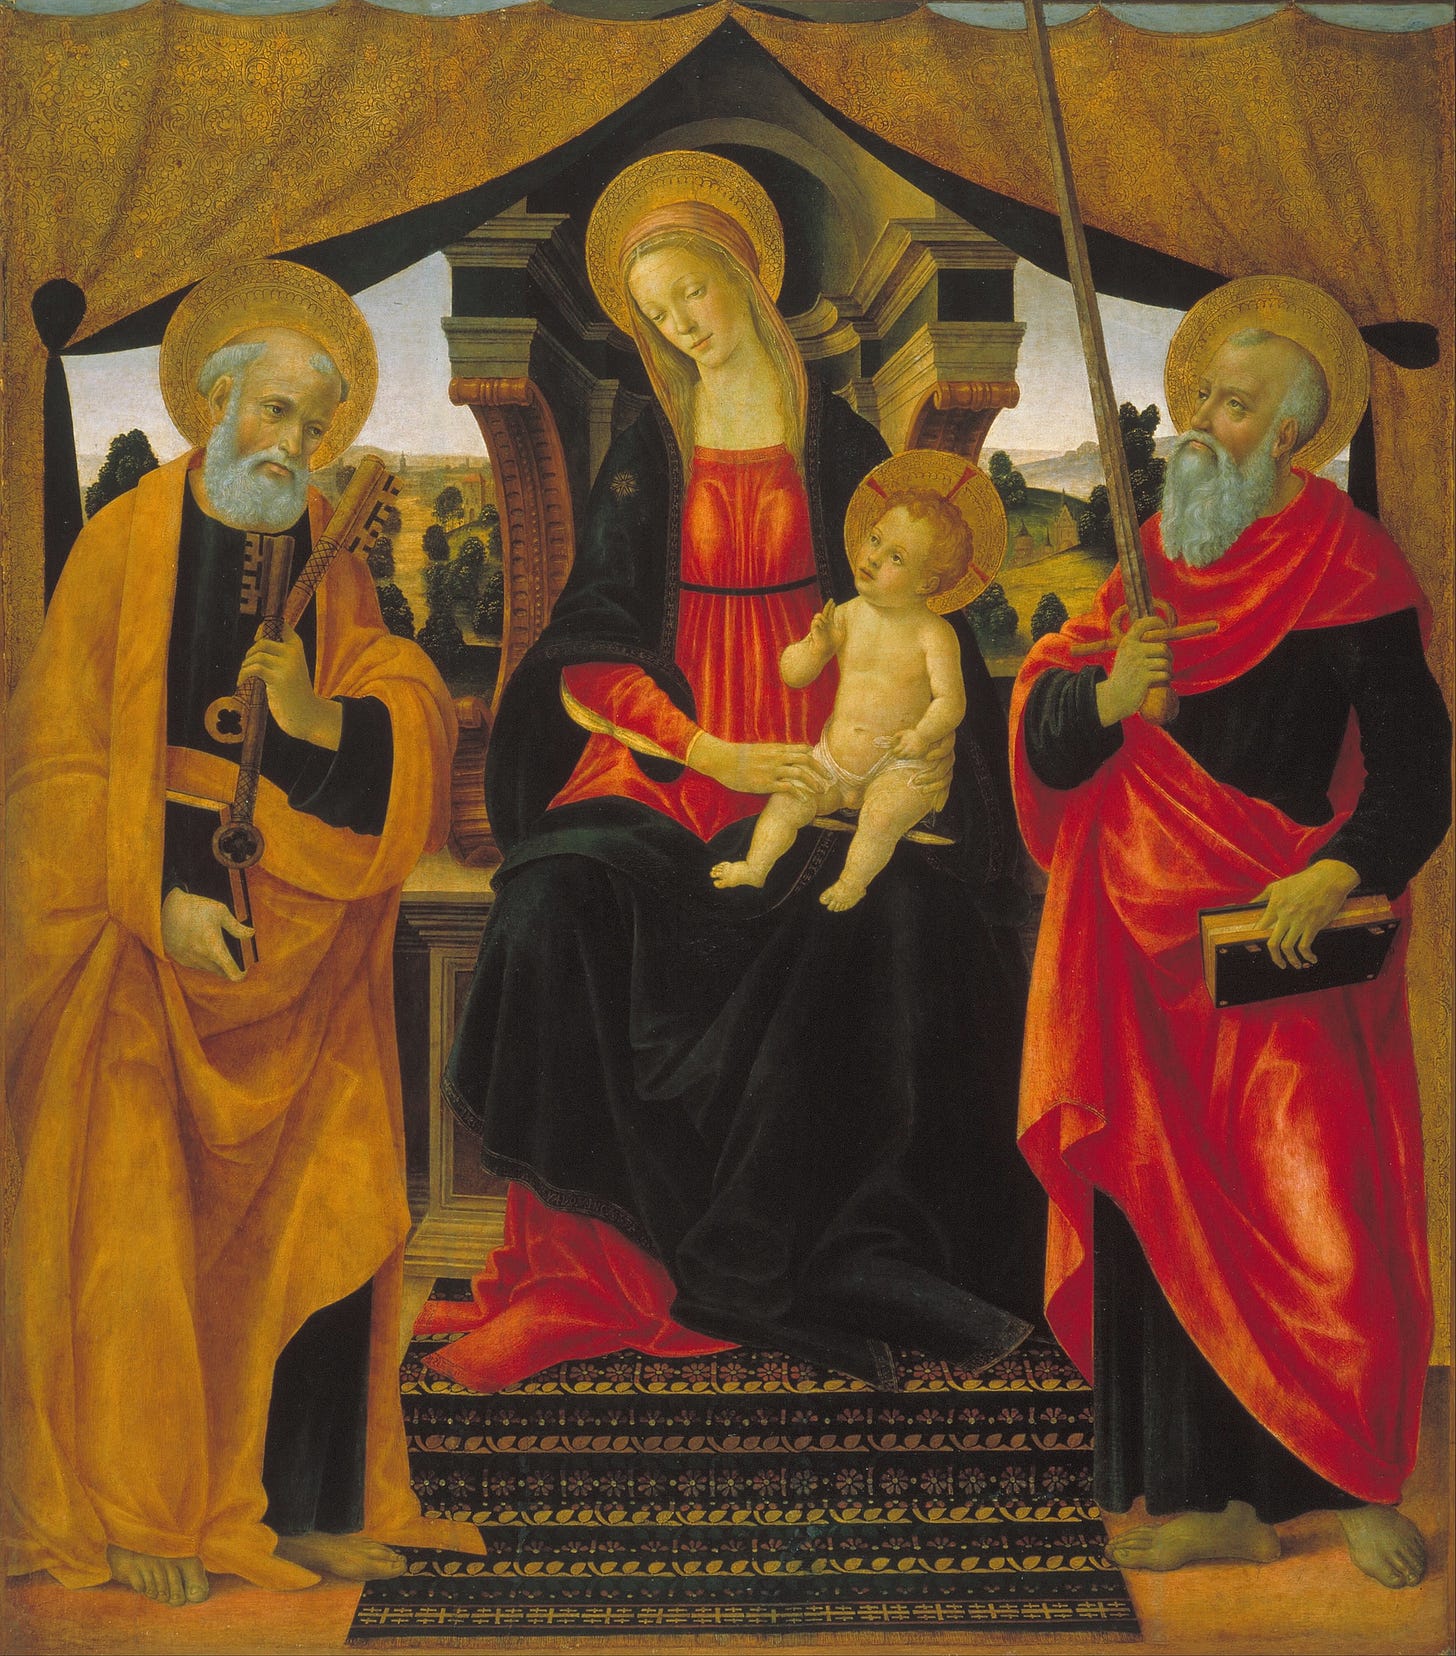 Virgin and Child between Saint Peter and Saint Paul (circa 1490) by Vincenzo Frediani (Italian, active 1481-1505)